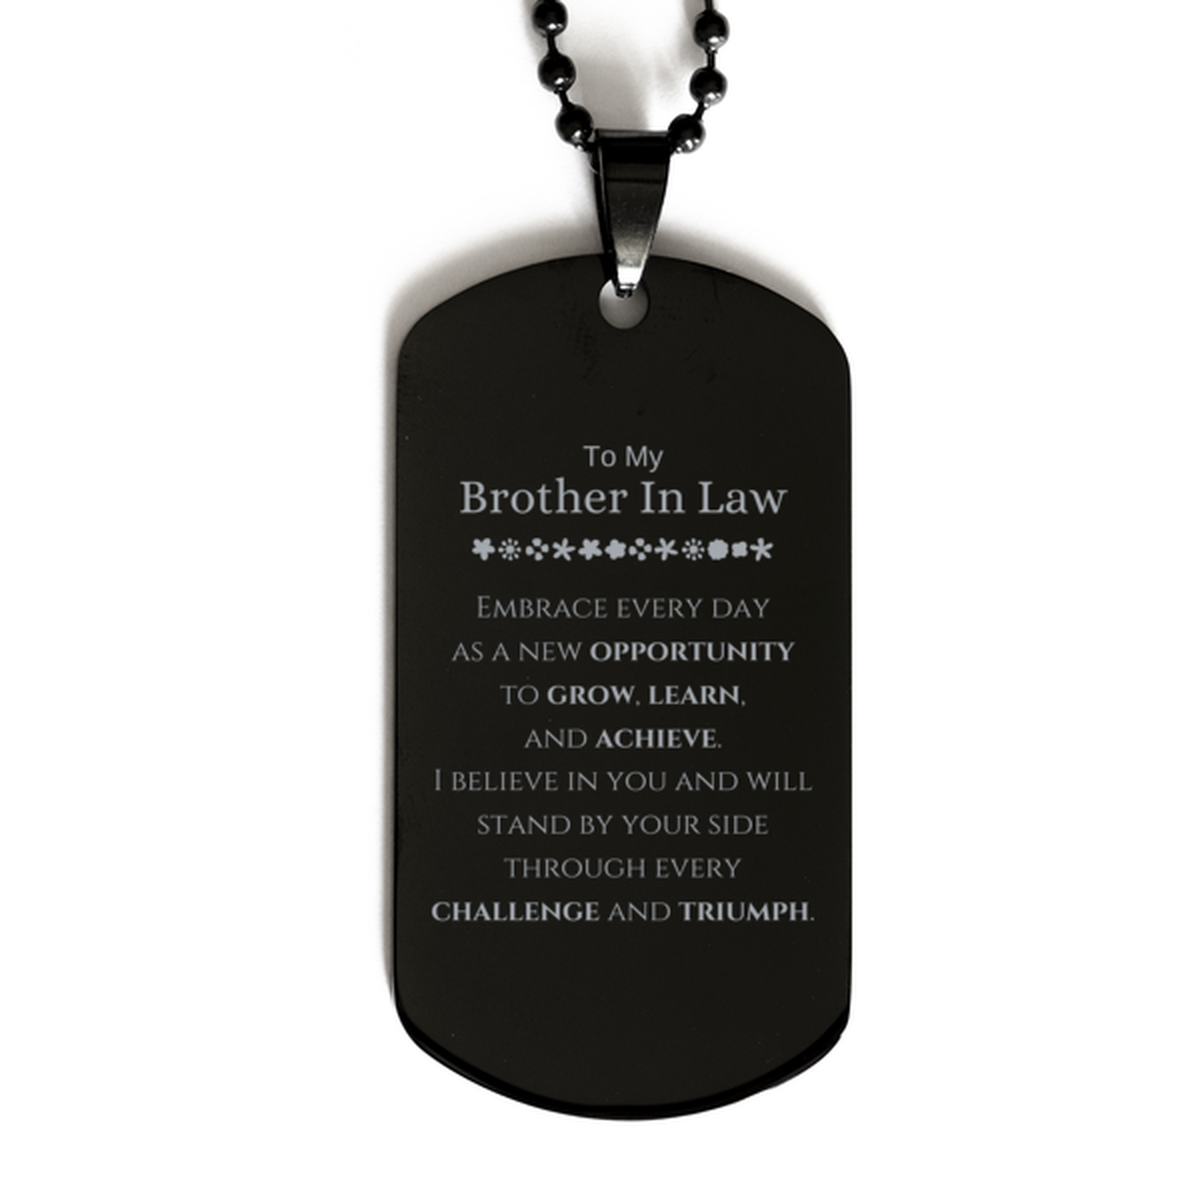 To My Brother In Law Gifts, I believe in you and will stand by your side, Inspirational Black Dog Tag For Brother In Law, Birthday Christmas Motivational Brother In Law Gifts